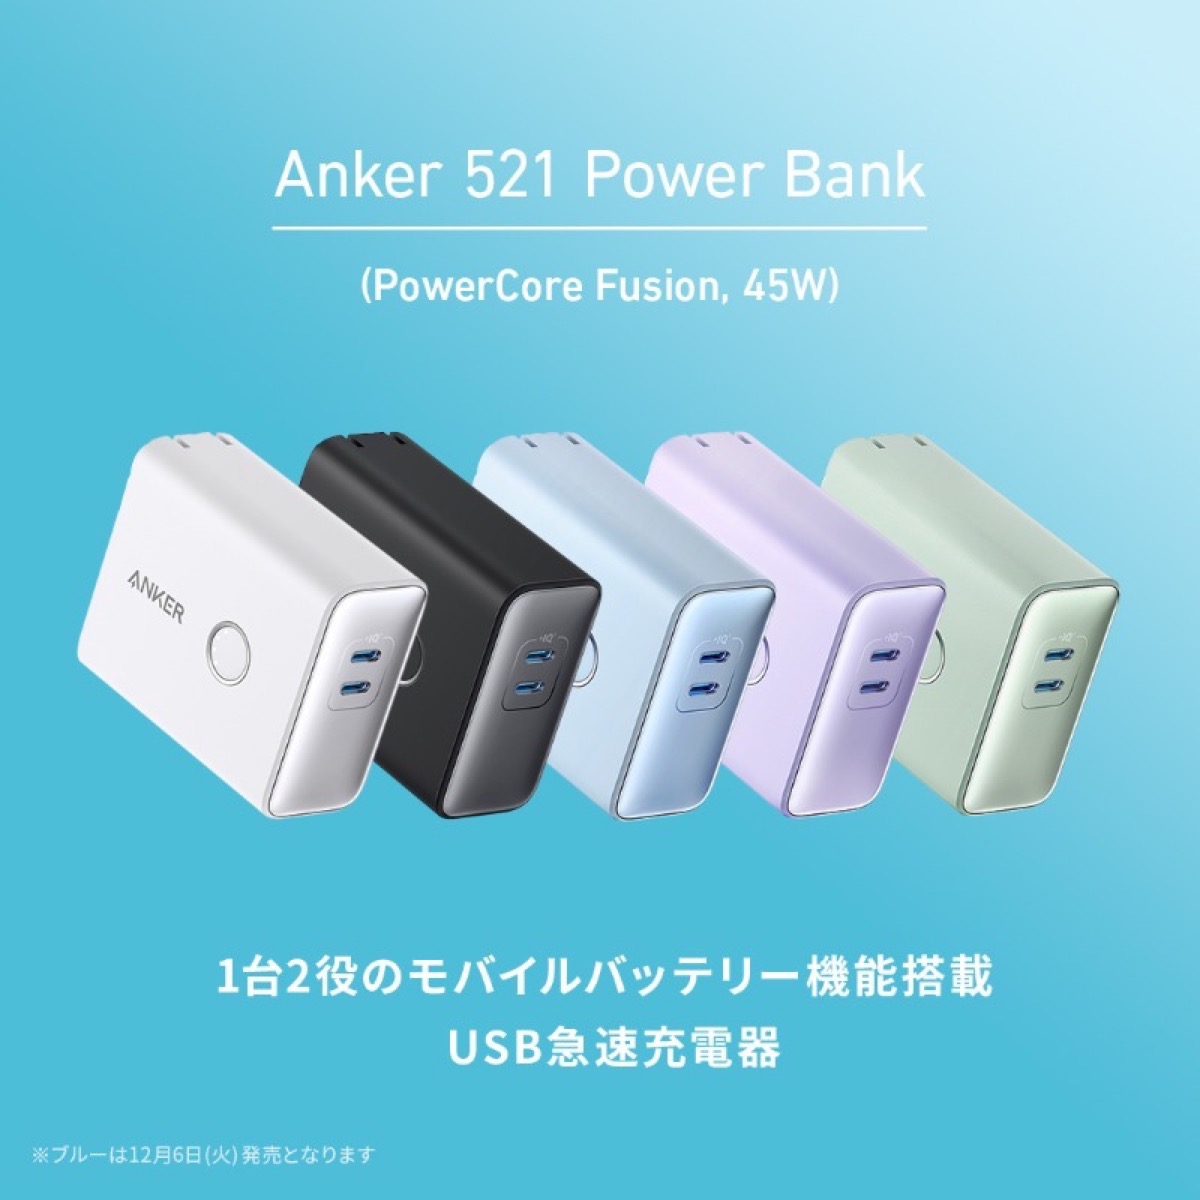 Anker 521 Power Bank（PowerCore Fusion）が新発売 - iPhone Mania